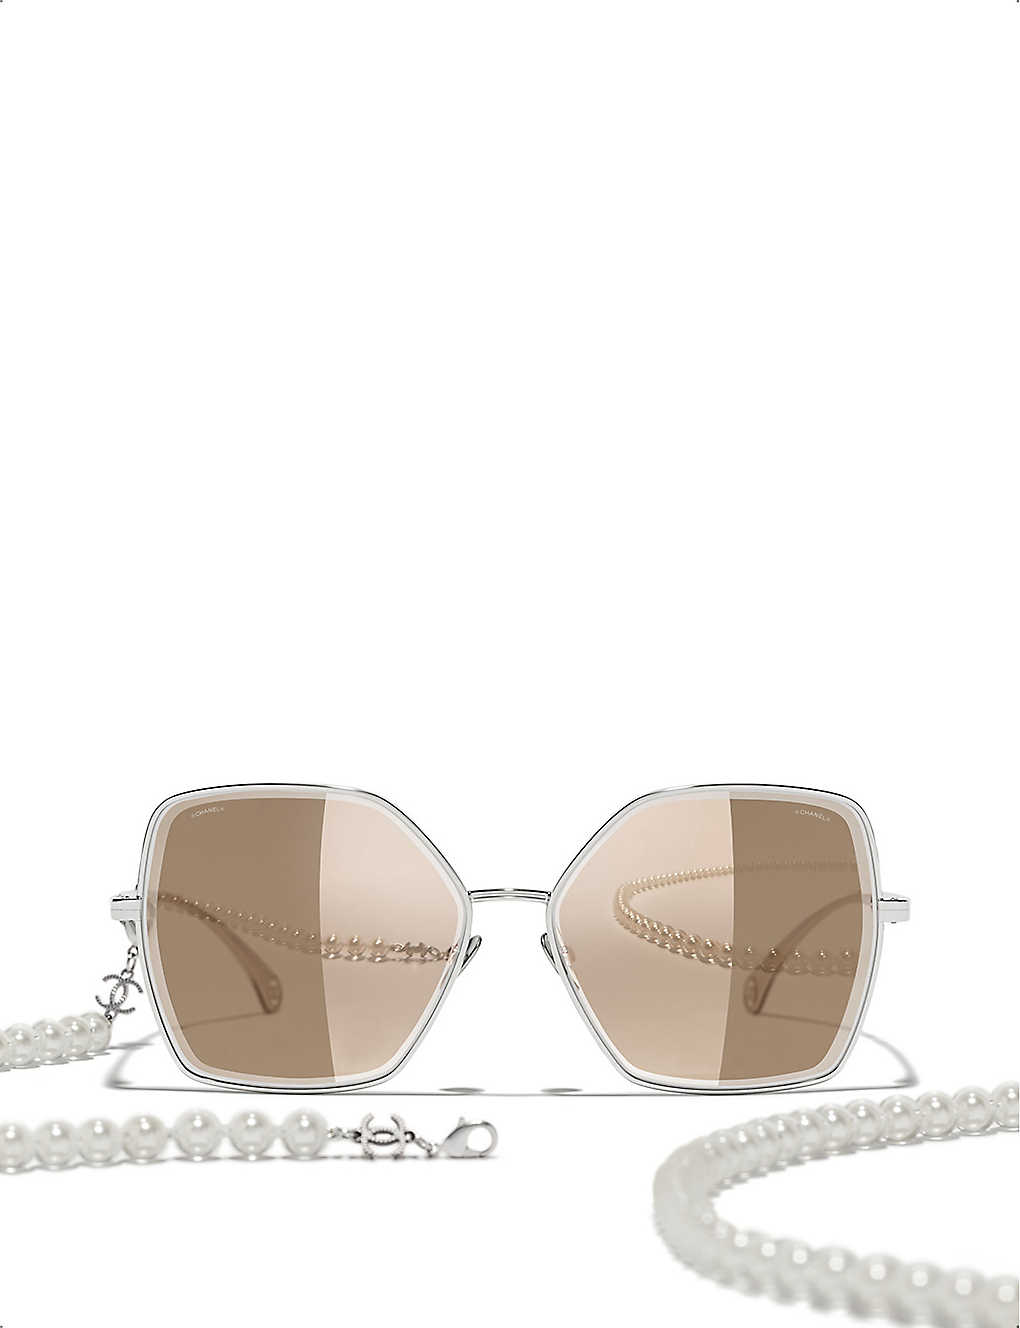 66974 auth CHANEL gold-tone 2020 4262 PEARL NECKLACE BUTTERFLY Sunglasses